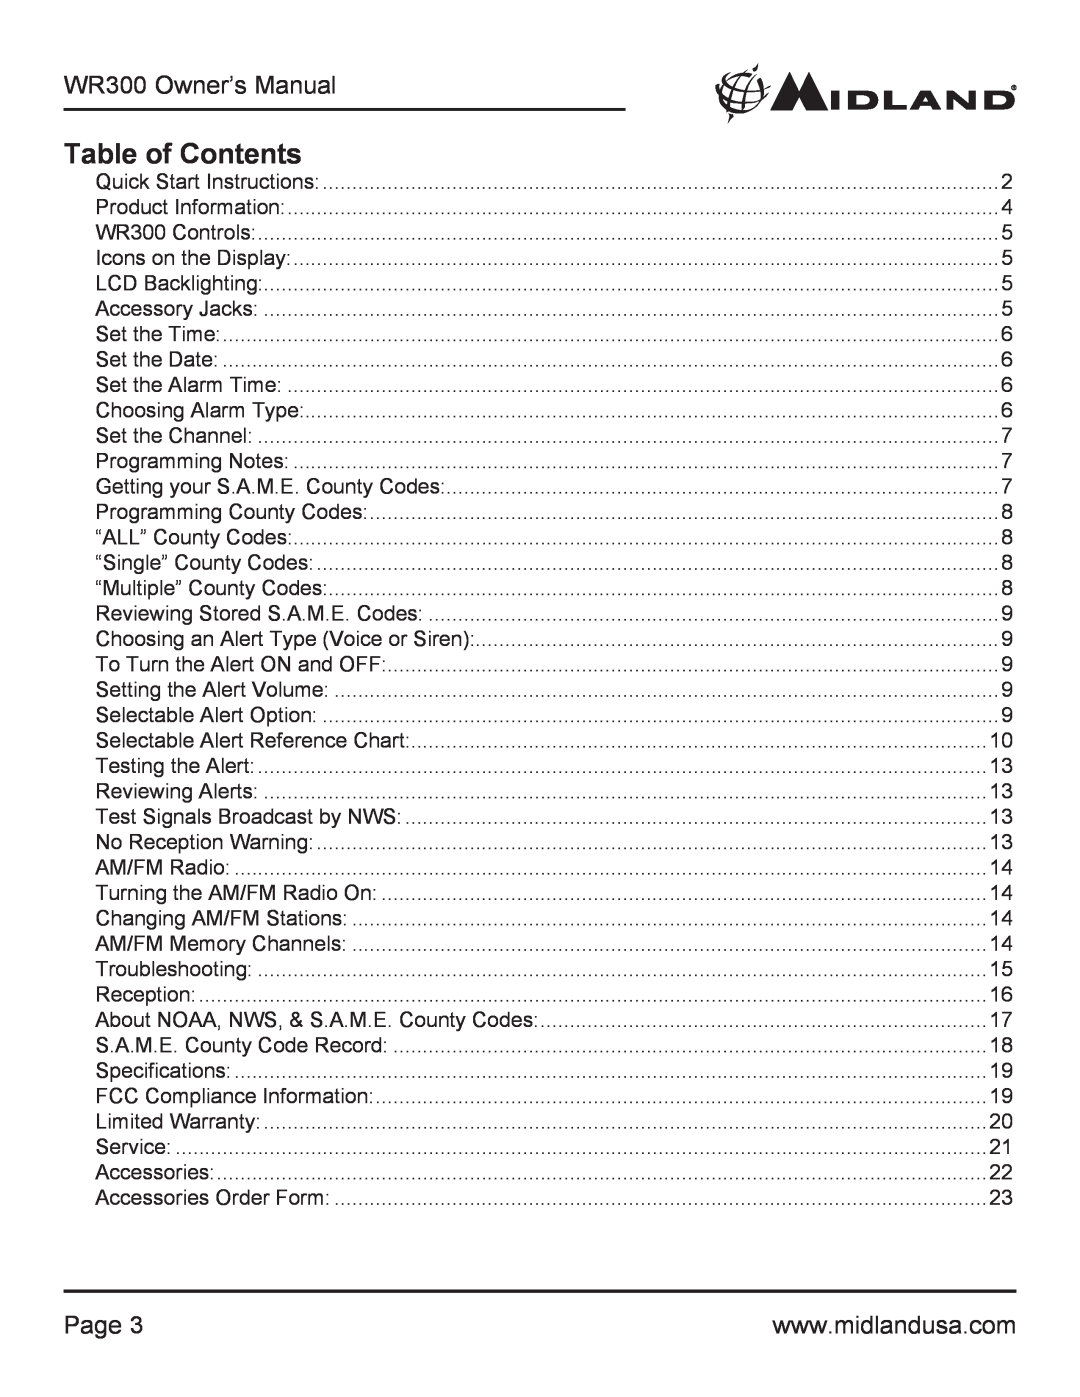 Midland Radio WR300 owner manual Table of Contents, Page 